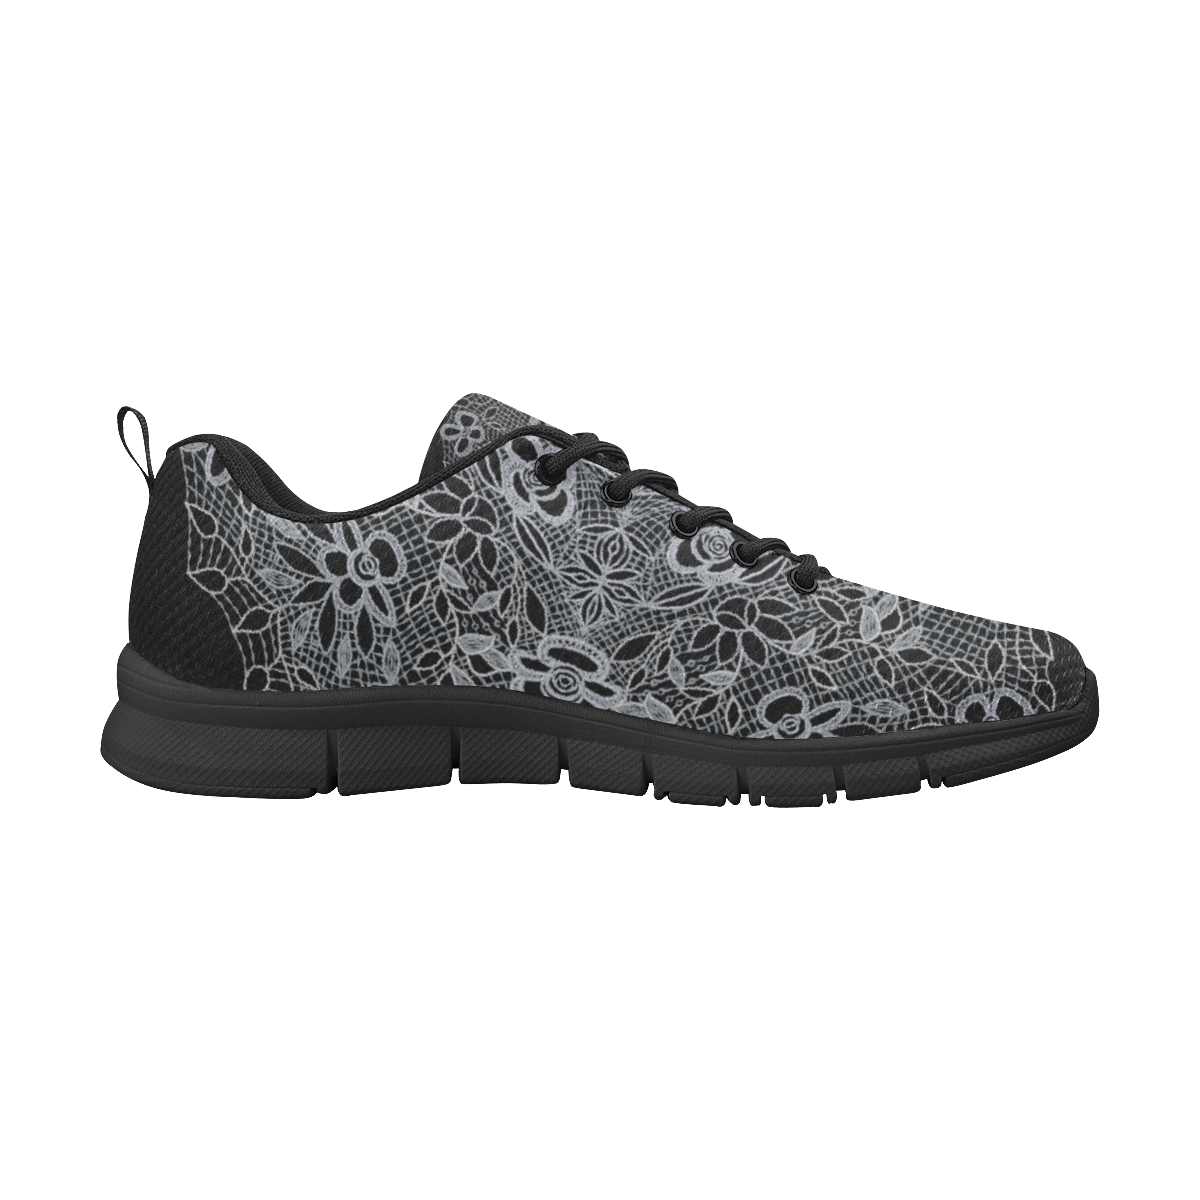 White Crocheted Lace Mandala Pattern Women's Breathable Running Shoes (Model 055)